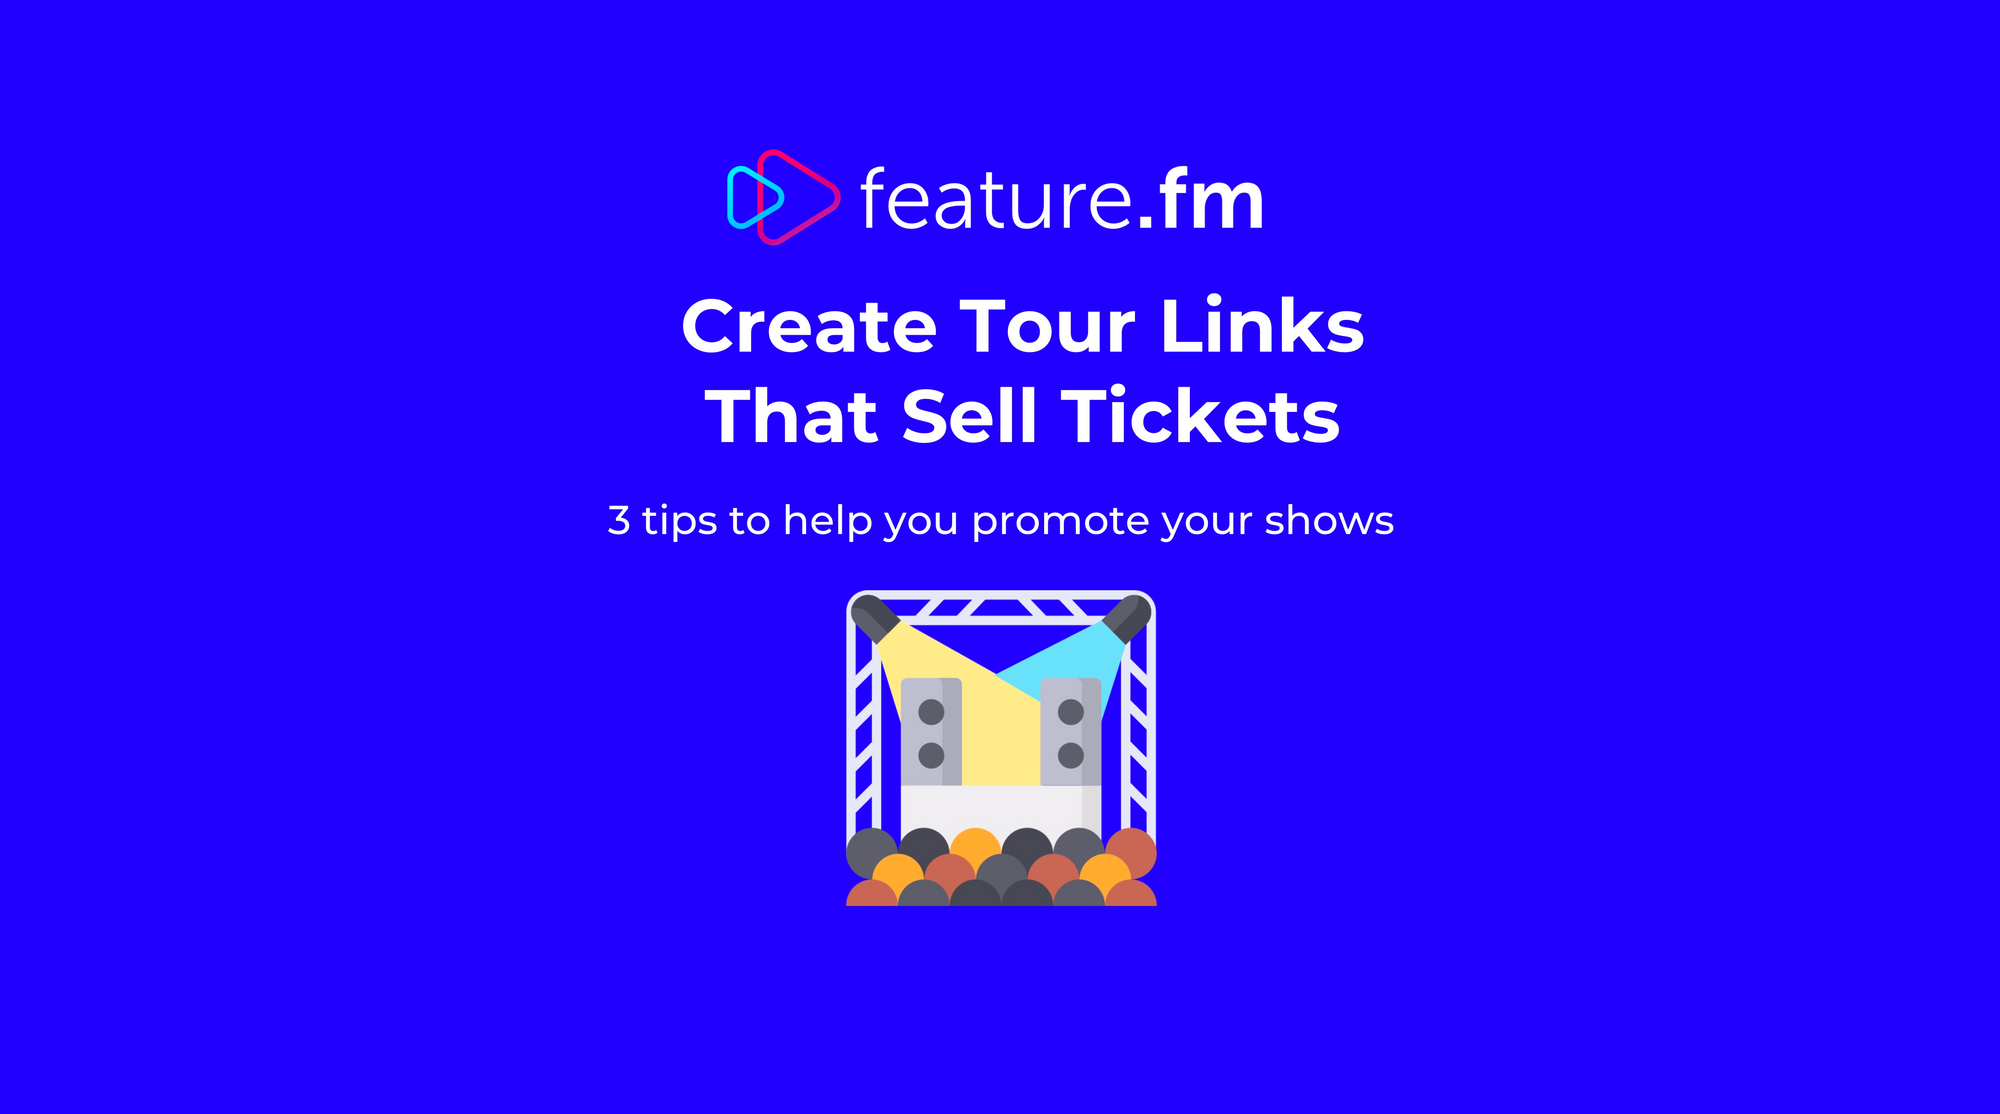 Day 2: Create Tour Links that sell tickets